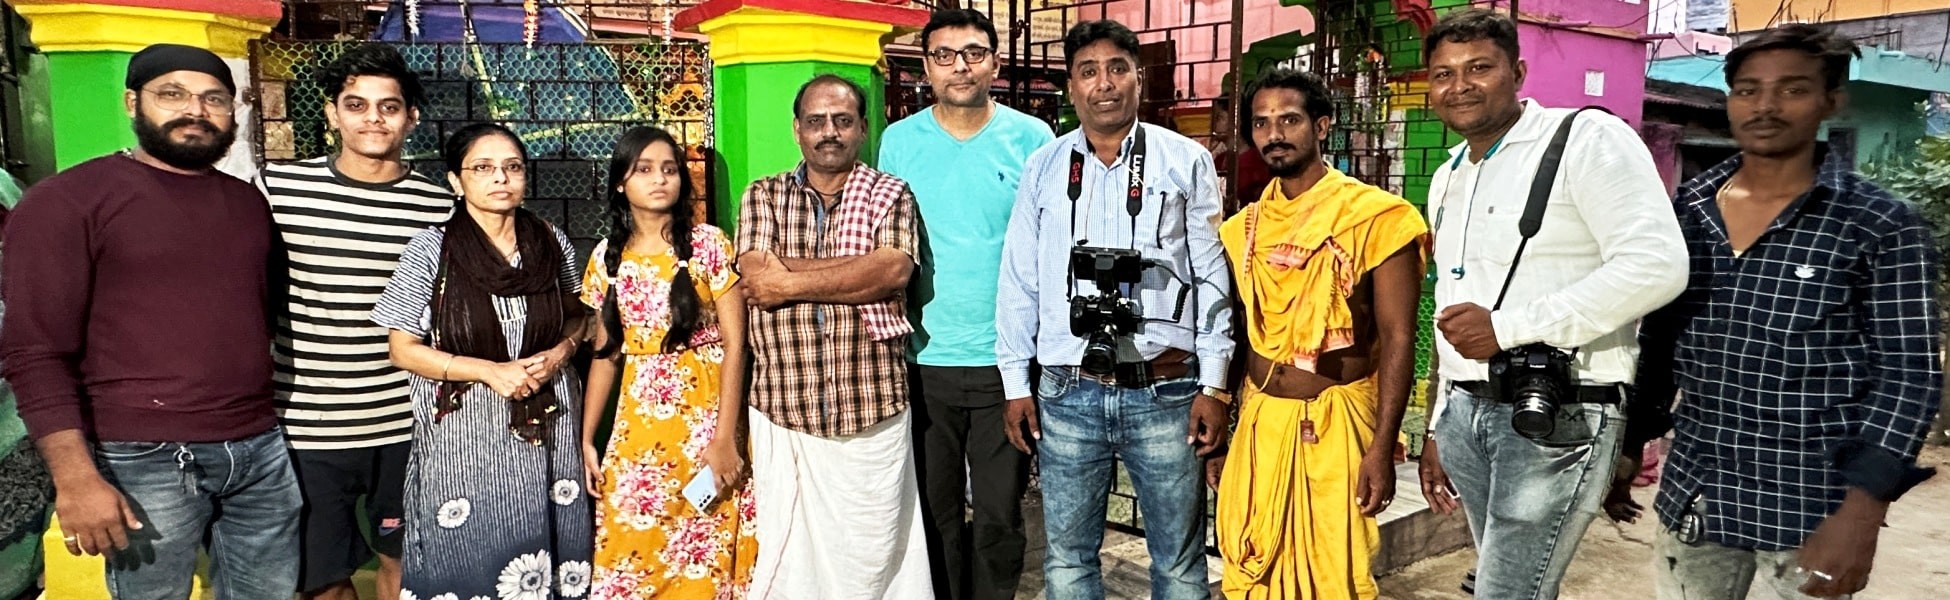 film shooting locations in india, film shooting locations in rajasthan, film shooting locations in udaipur, video shooting locations in india, video shooting locations in rajasthan, video shooting locations in udaipur, tv shooting locations in india, tv shooting locations in rajasthan, tv shooting locations in udaipur, shooting locations in india, shooting locations in rajasthan, shooting locations in udaipur